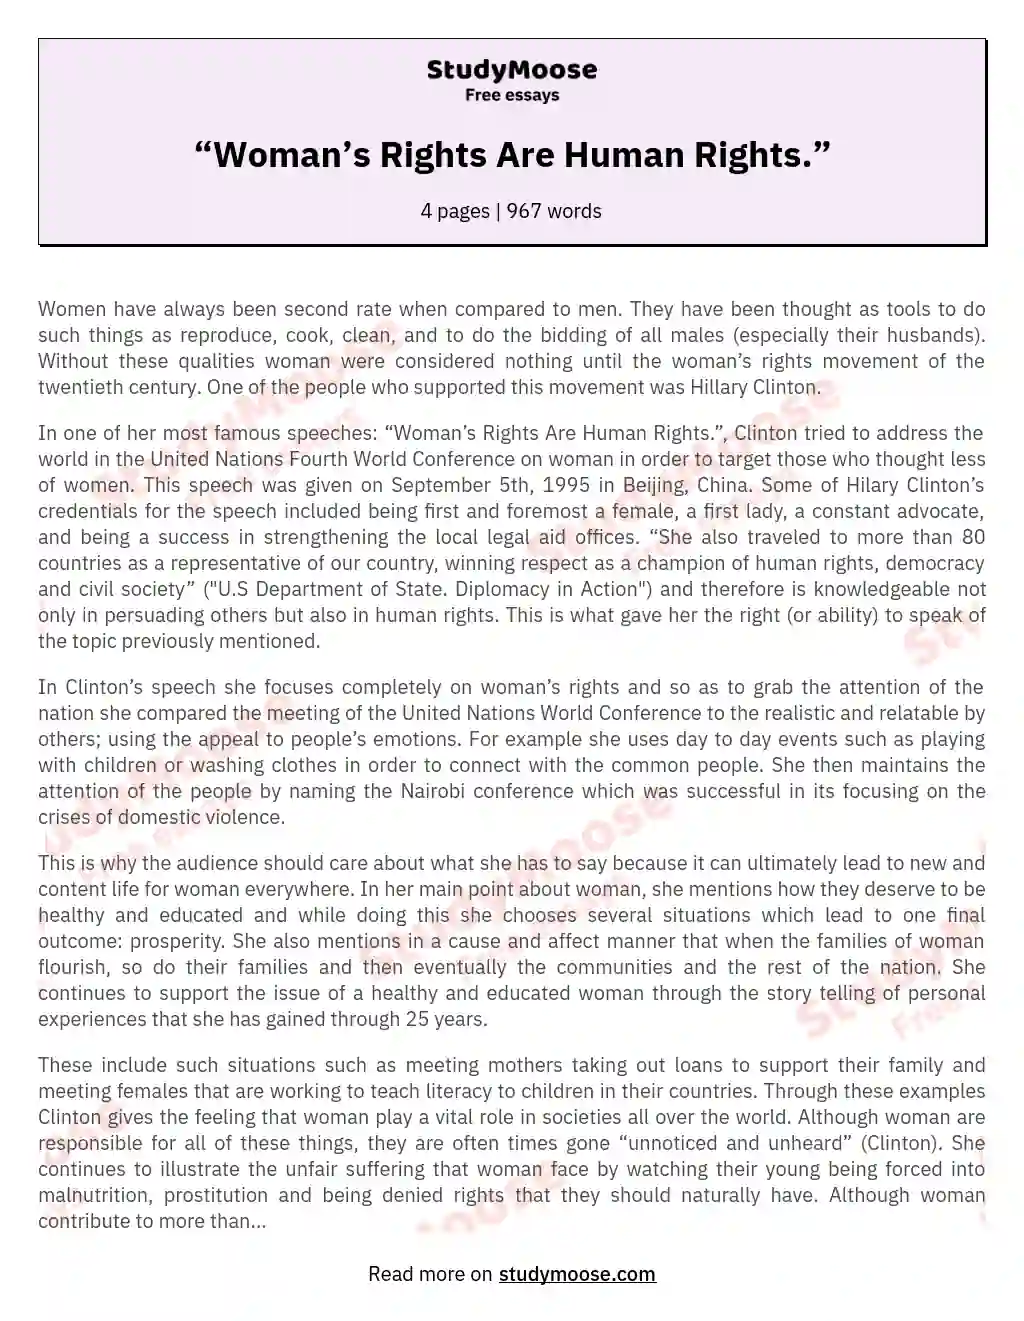 “Woman’s Rights Are Human Rights.” essay